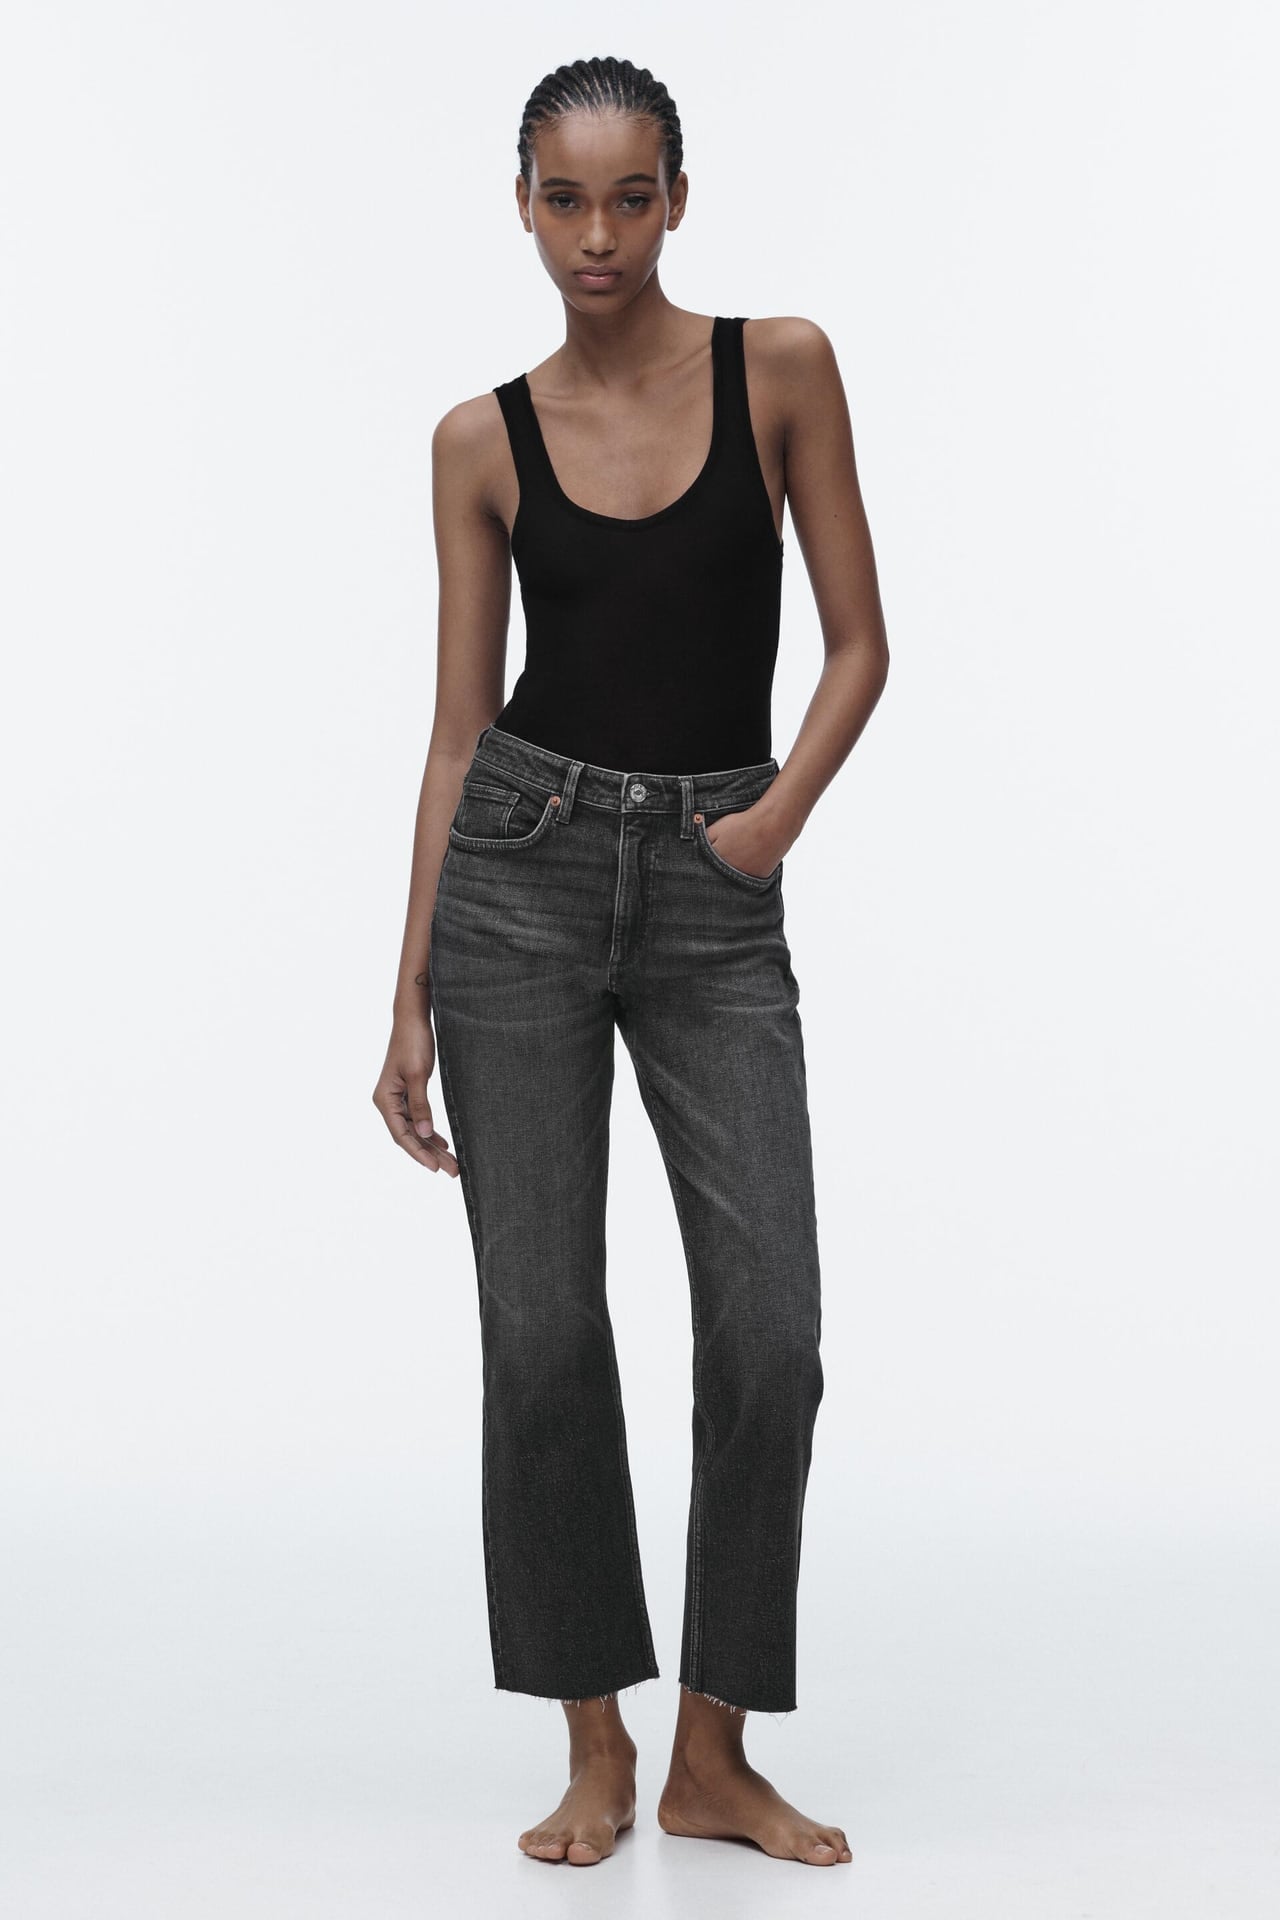 Best Zara jeans: Our fashion writer tries the 2023 styles